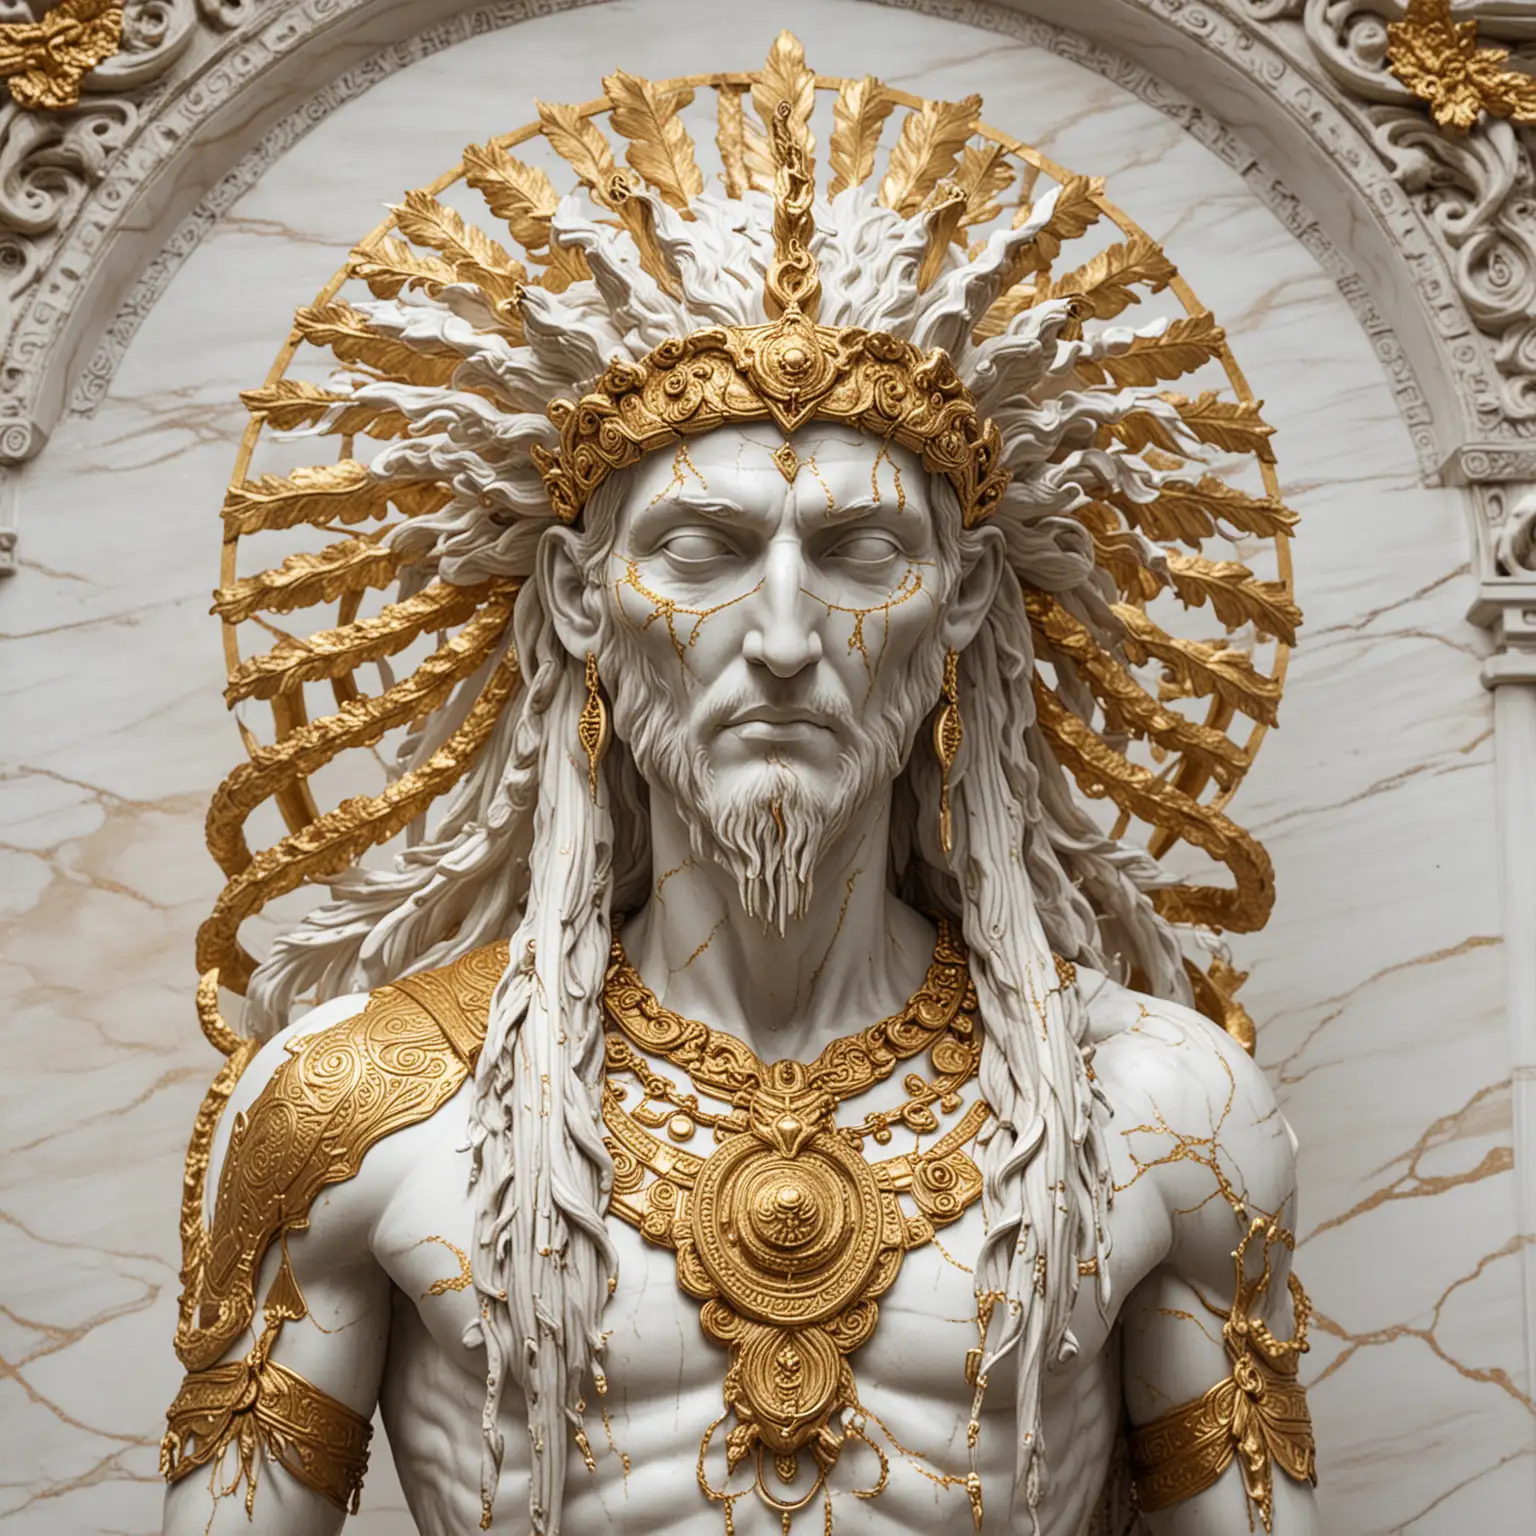 a marble statue of a eldritch god. native american features, with gold leaf patterns running across it, like a greek statue, it has multiple tails